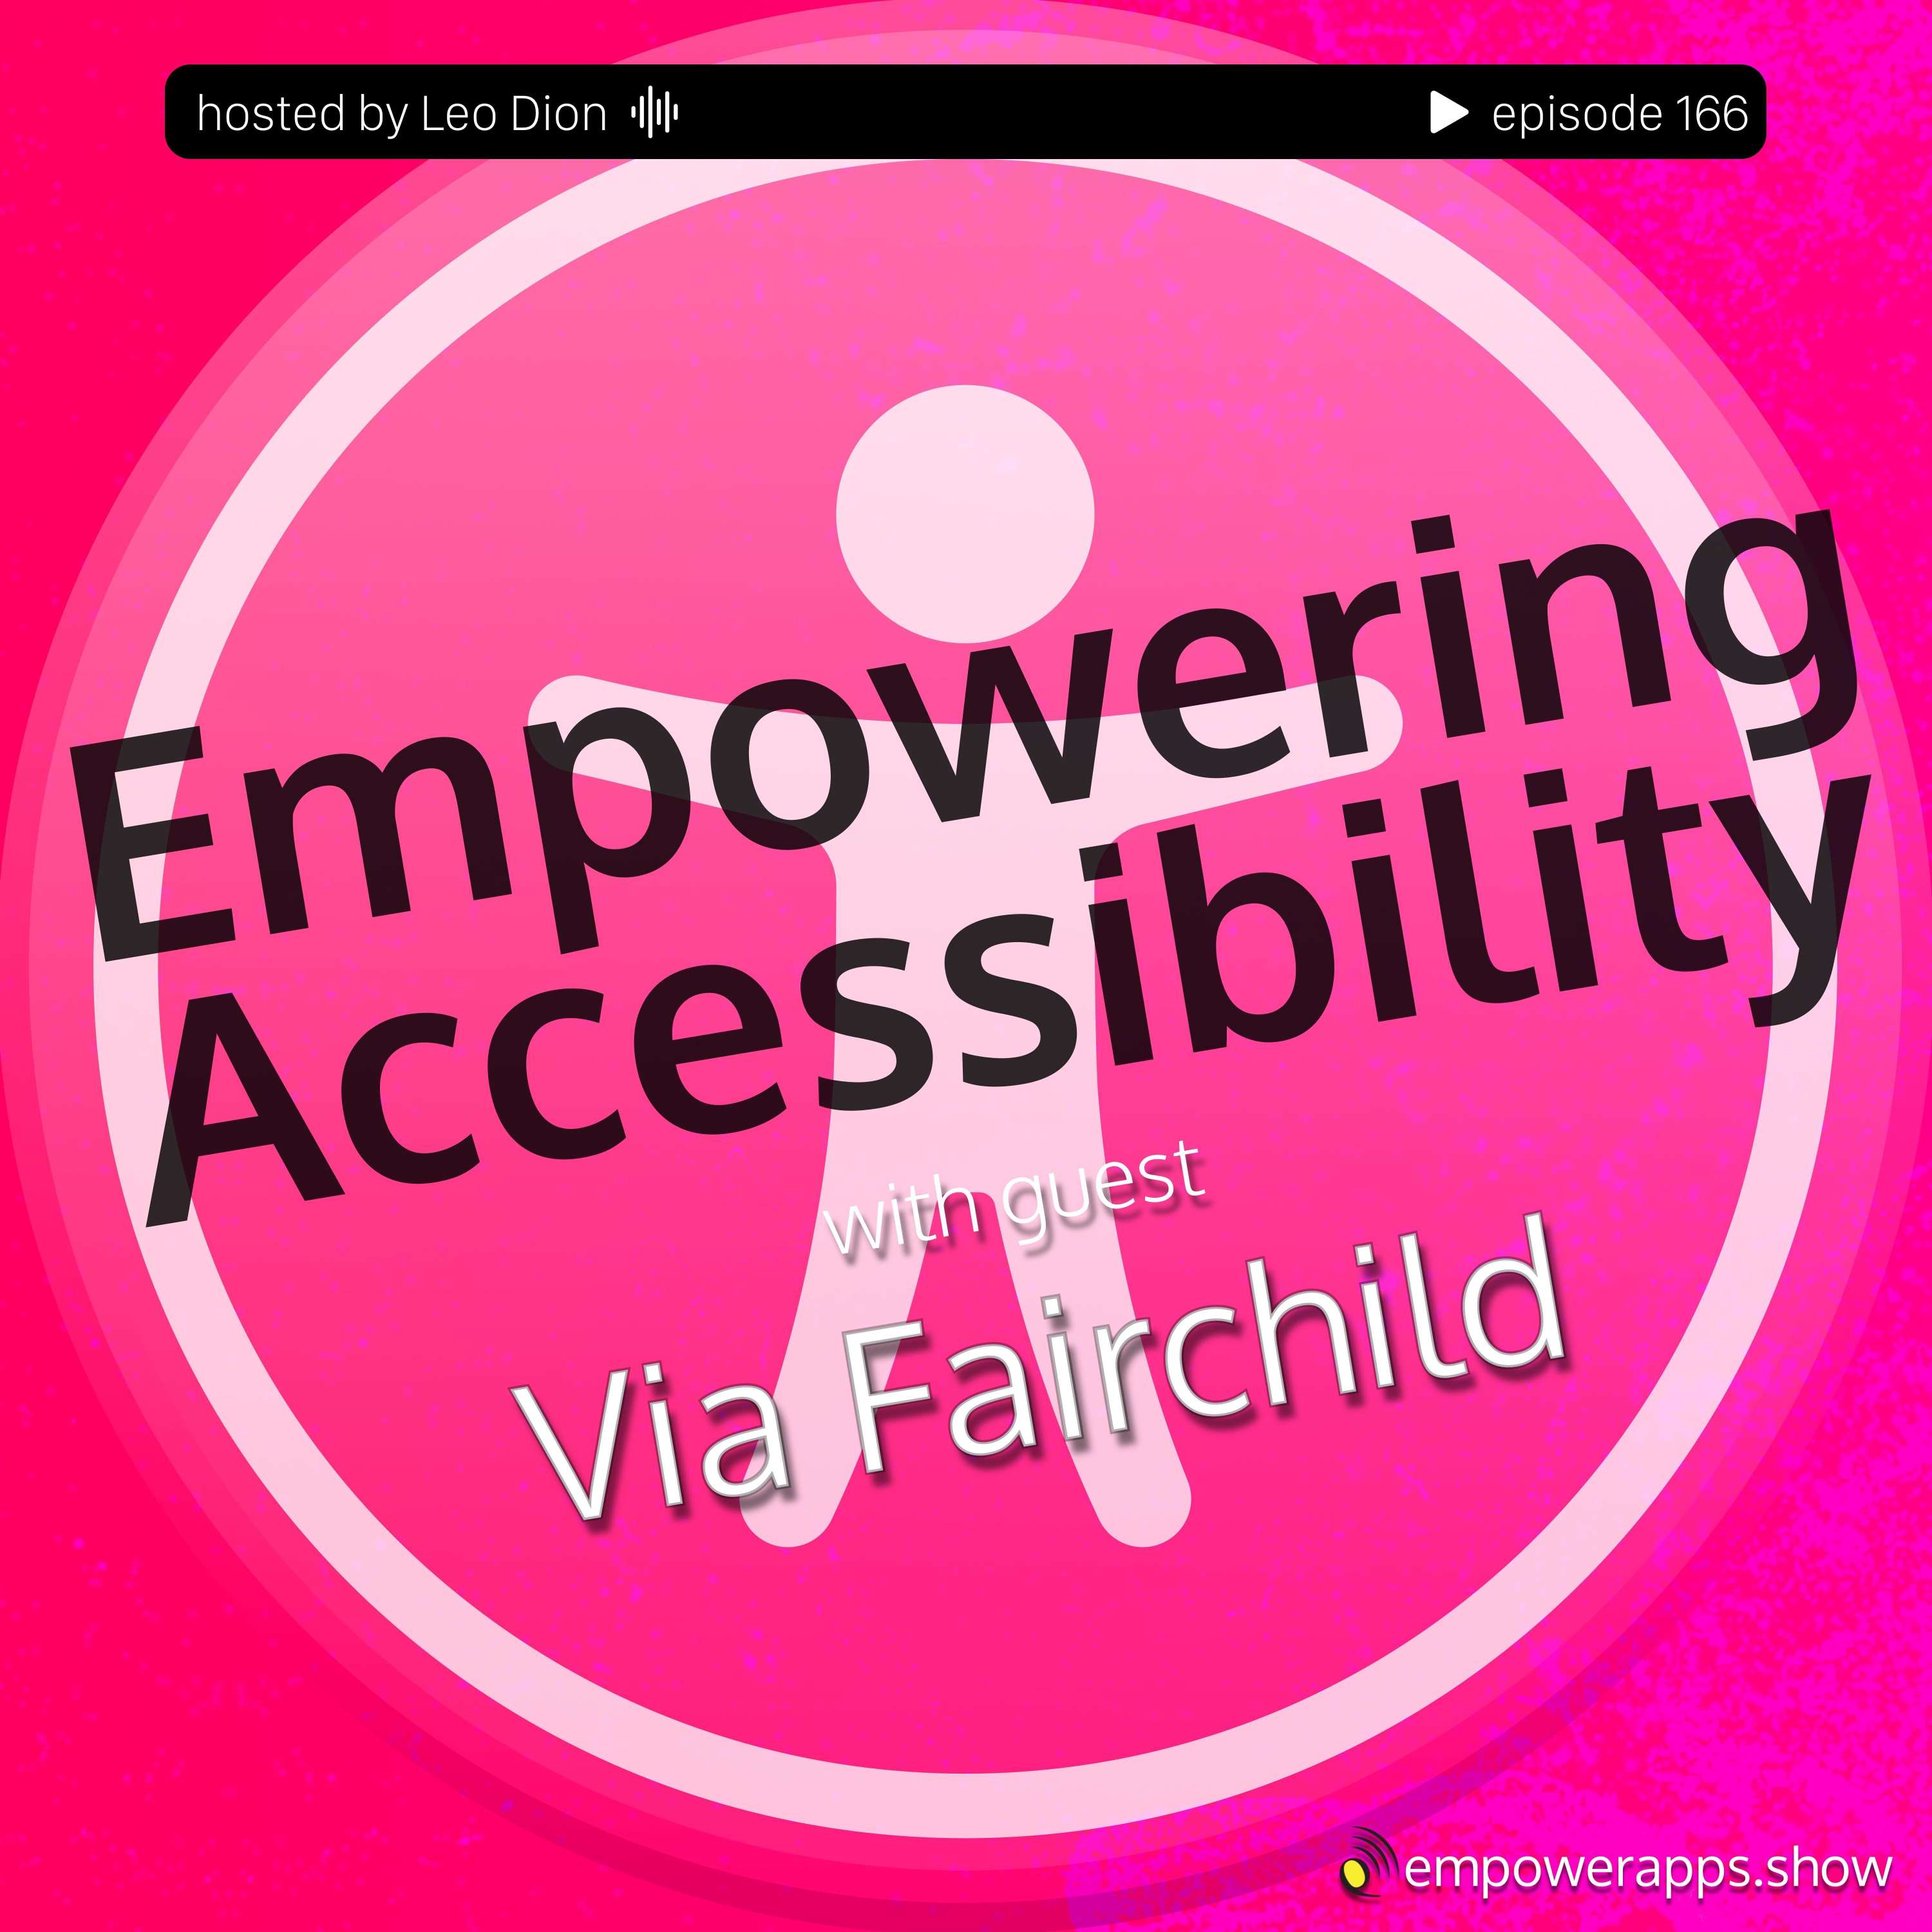 Empowering Accessibility with Via Fairchild